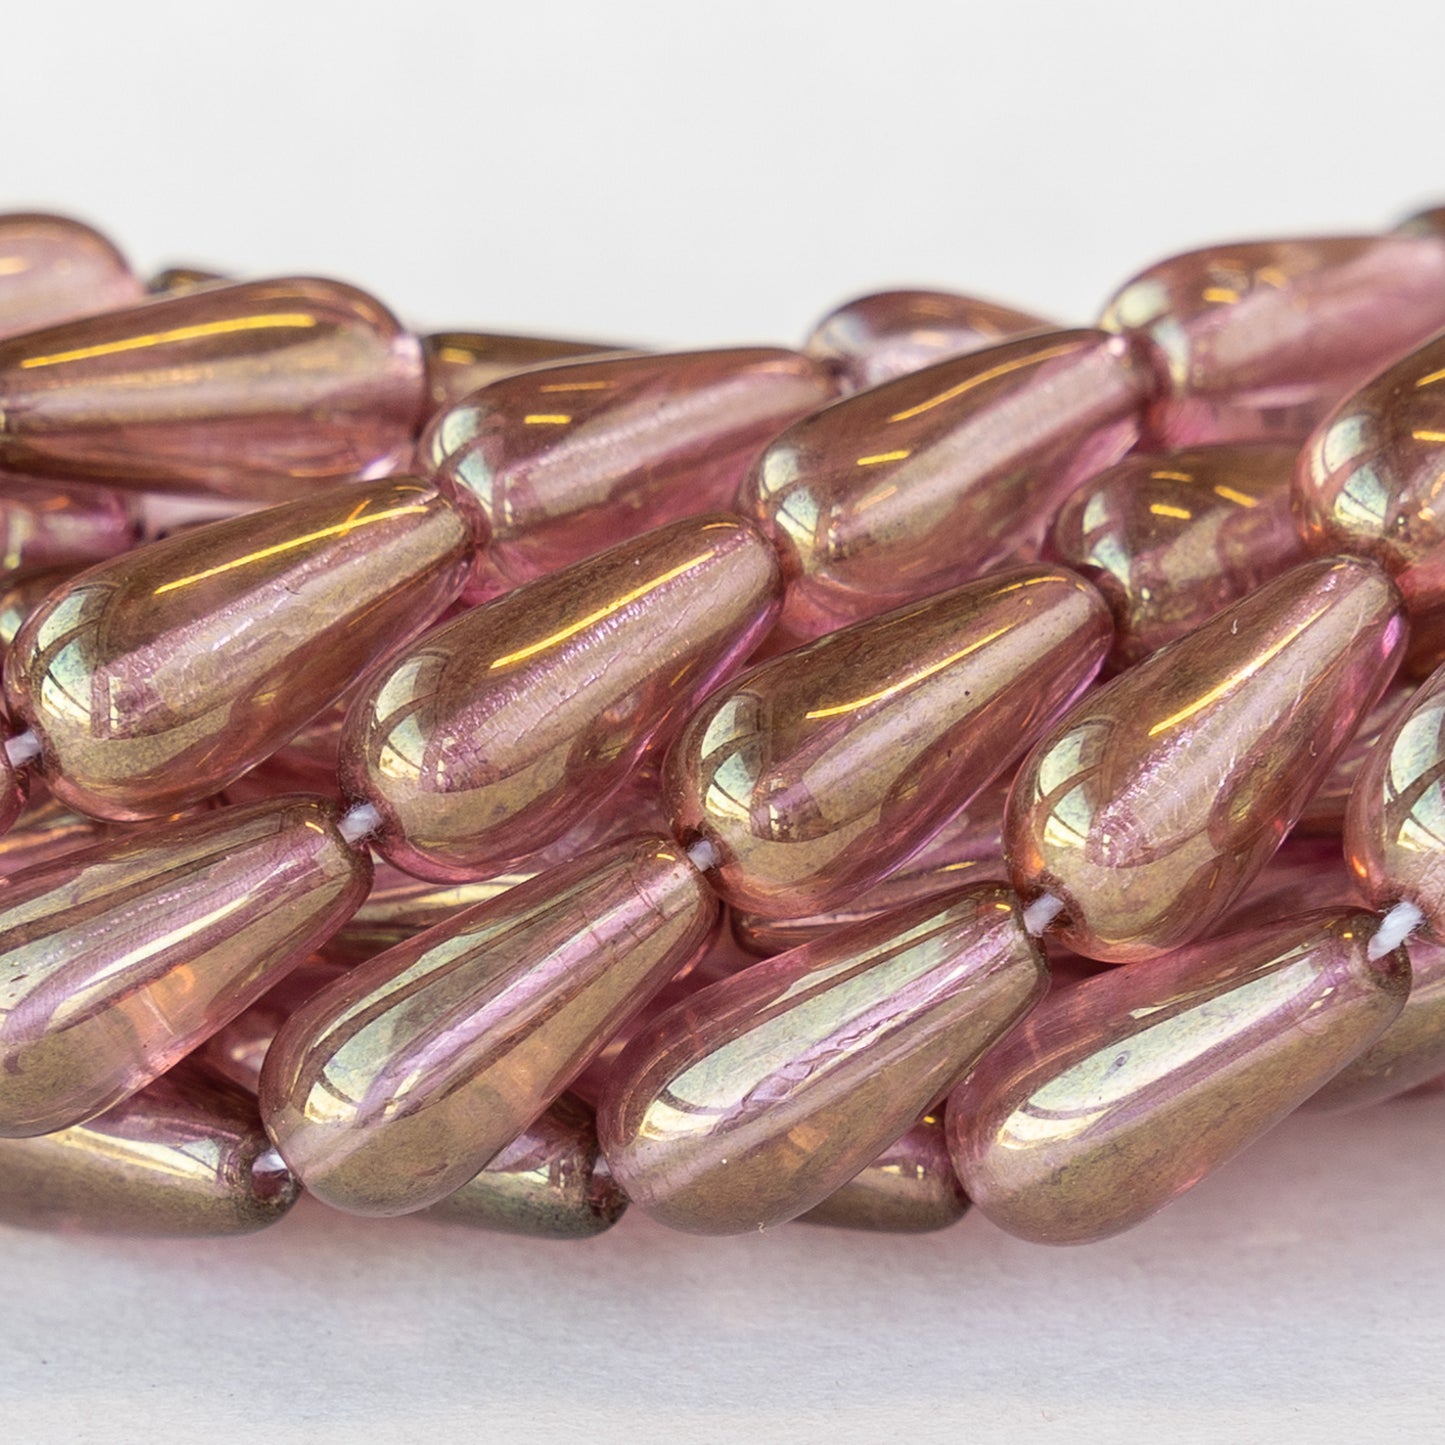 6x13mm Long Drill Drops - Rose Luster - 20 Beads